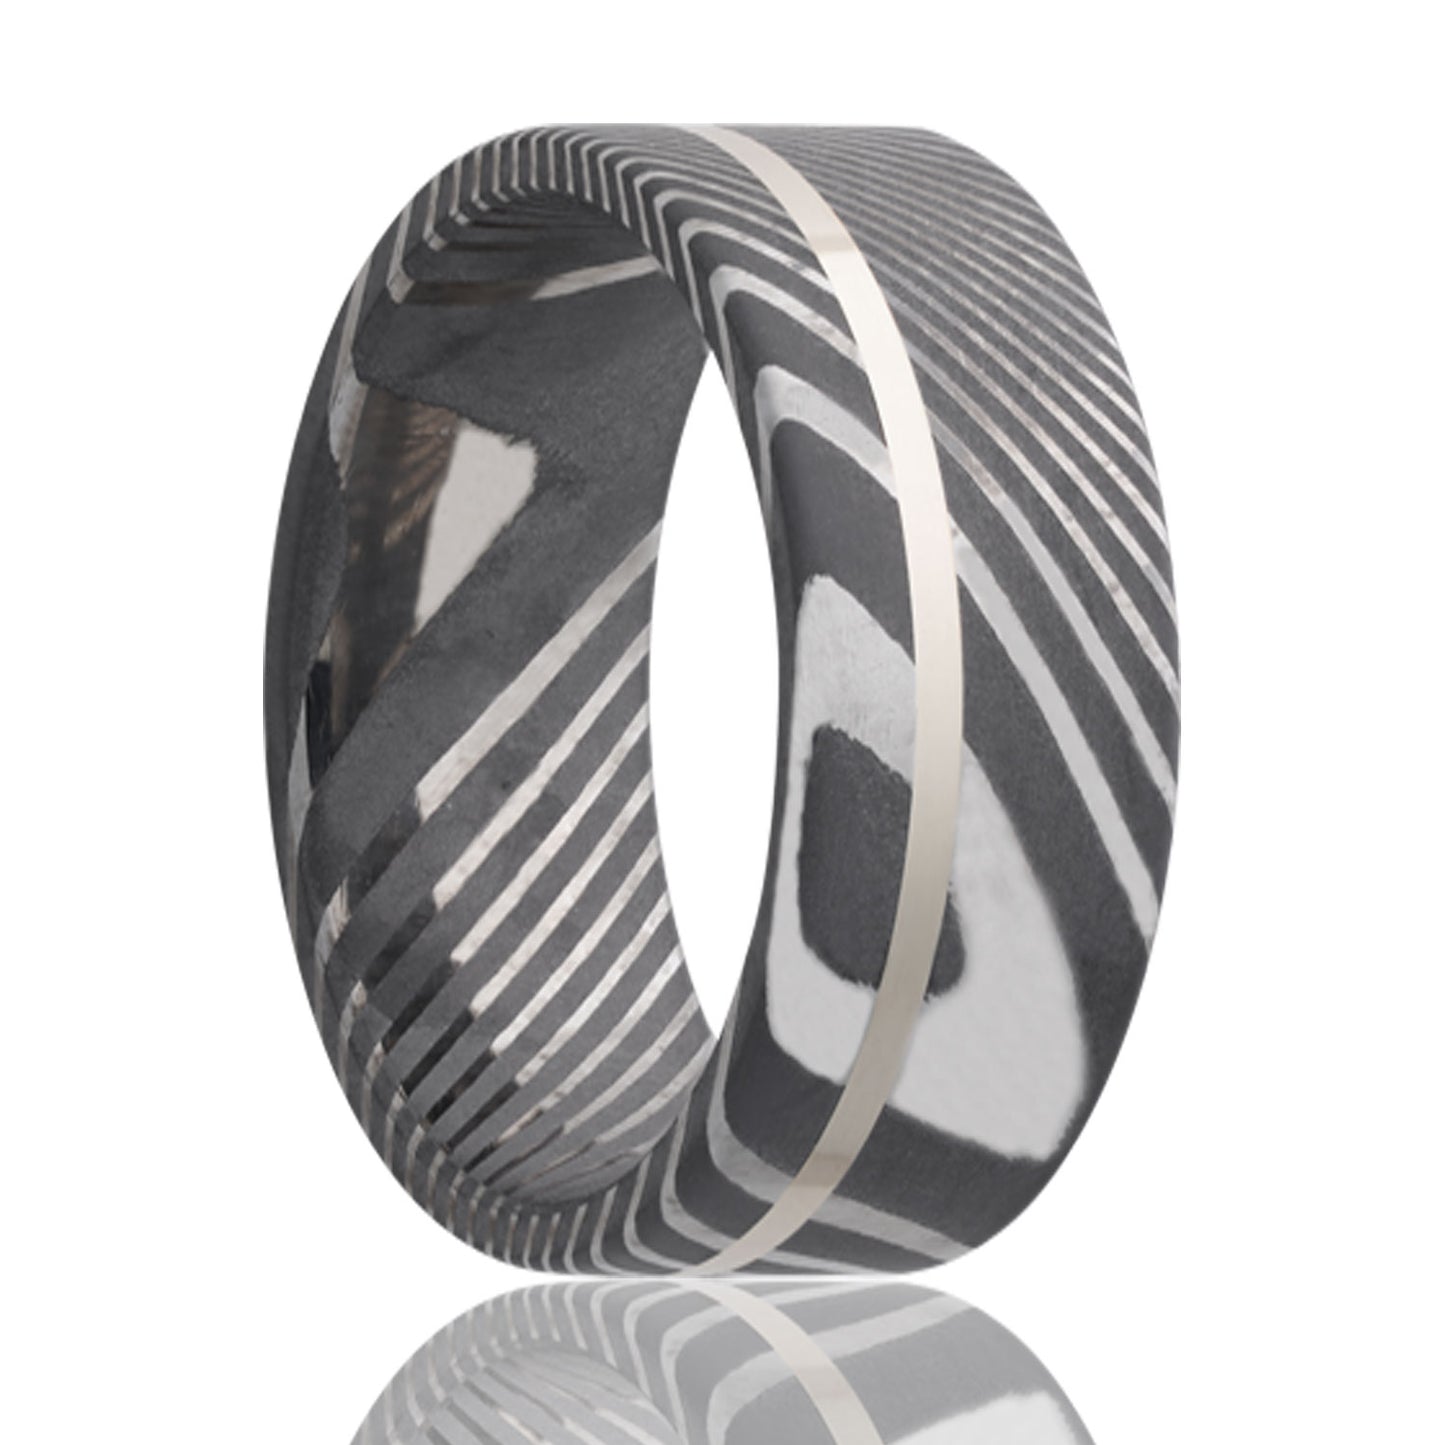 A asymmetrical silver inlay damascus steel men's wedding band displayed on a neutral white background.